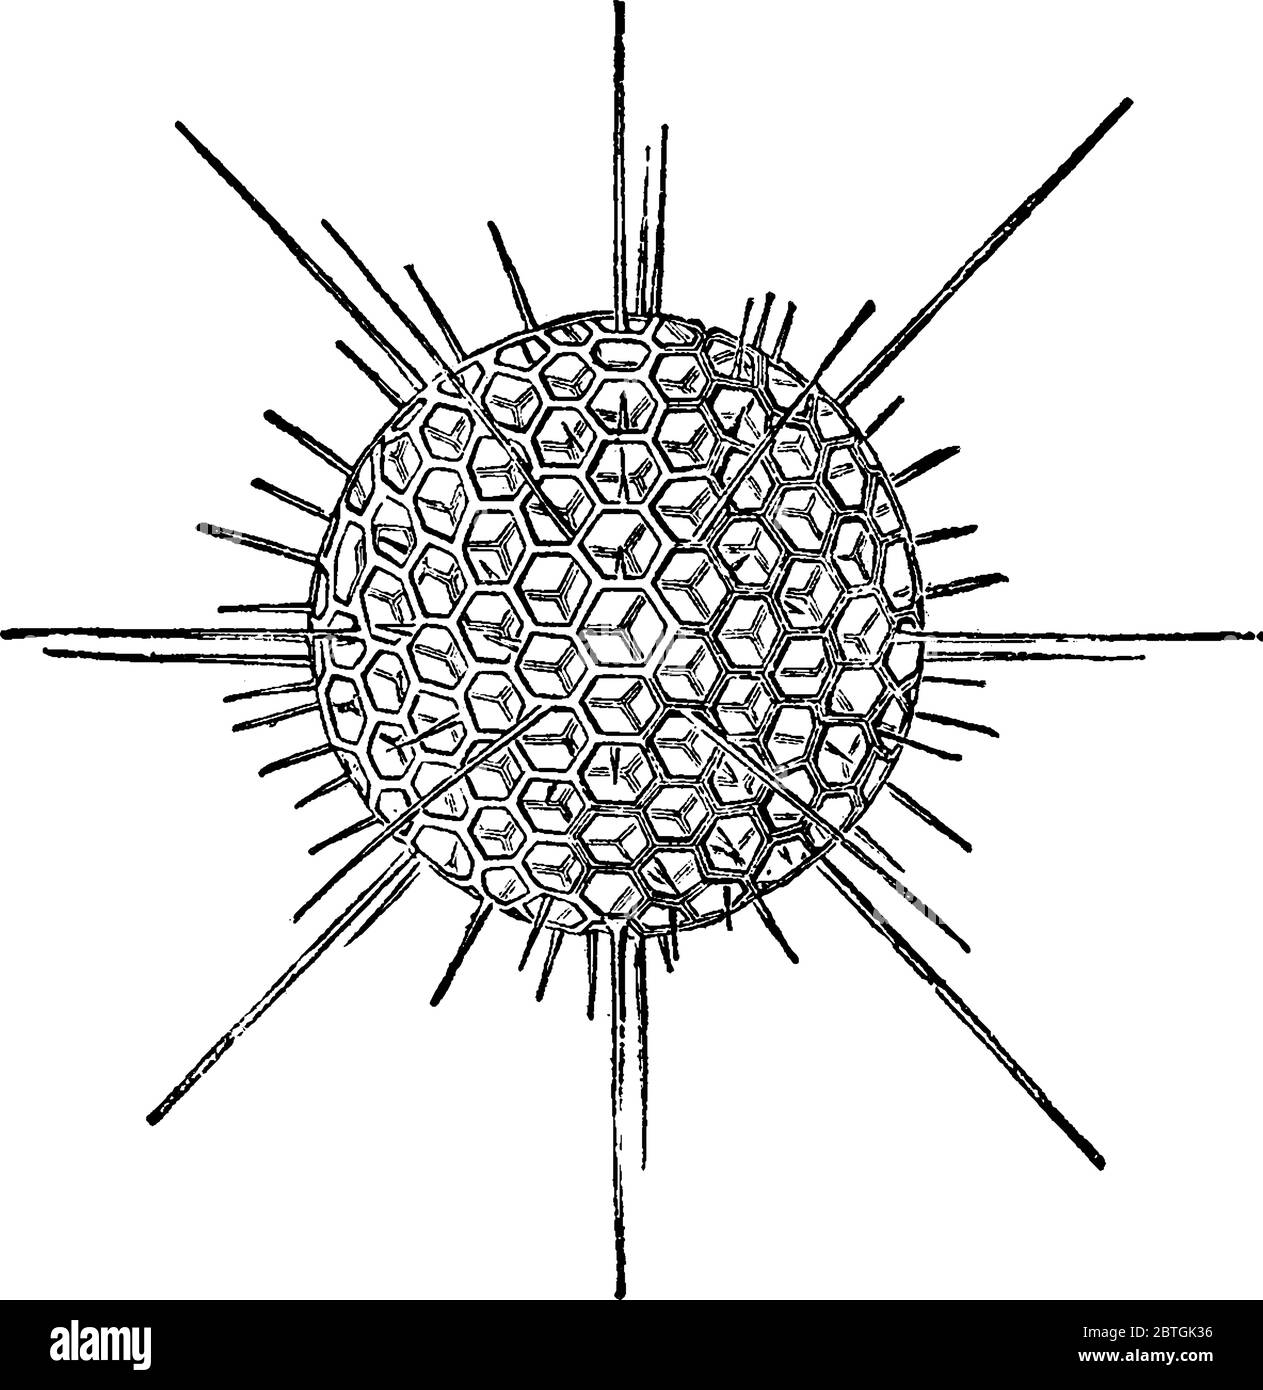 Figure showing the single-celled aquatic animal that has a spherical amoeba-like body with a spiny skeleton of silica, called radiolarian, vintage lin Stock Vector